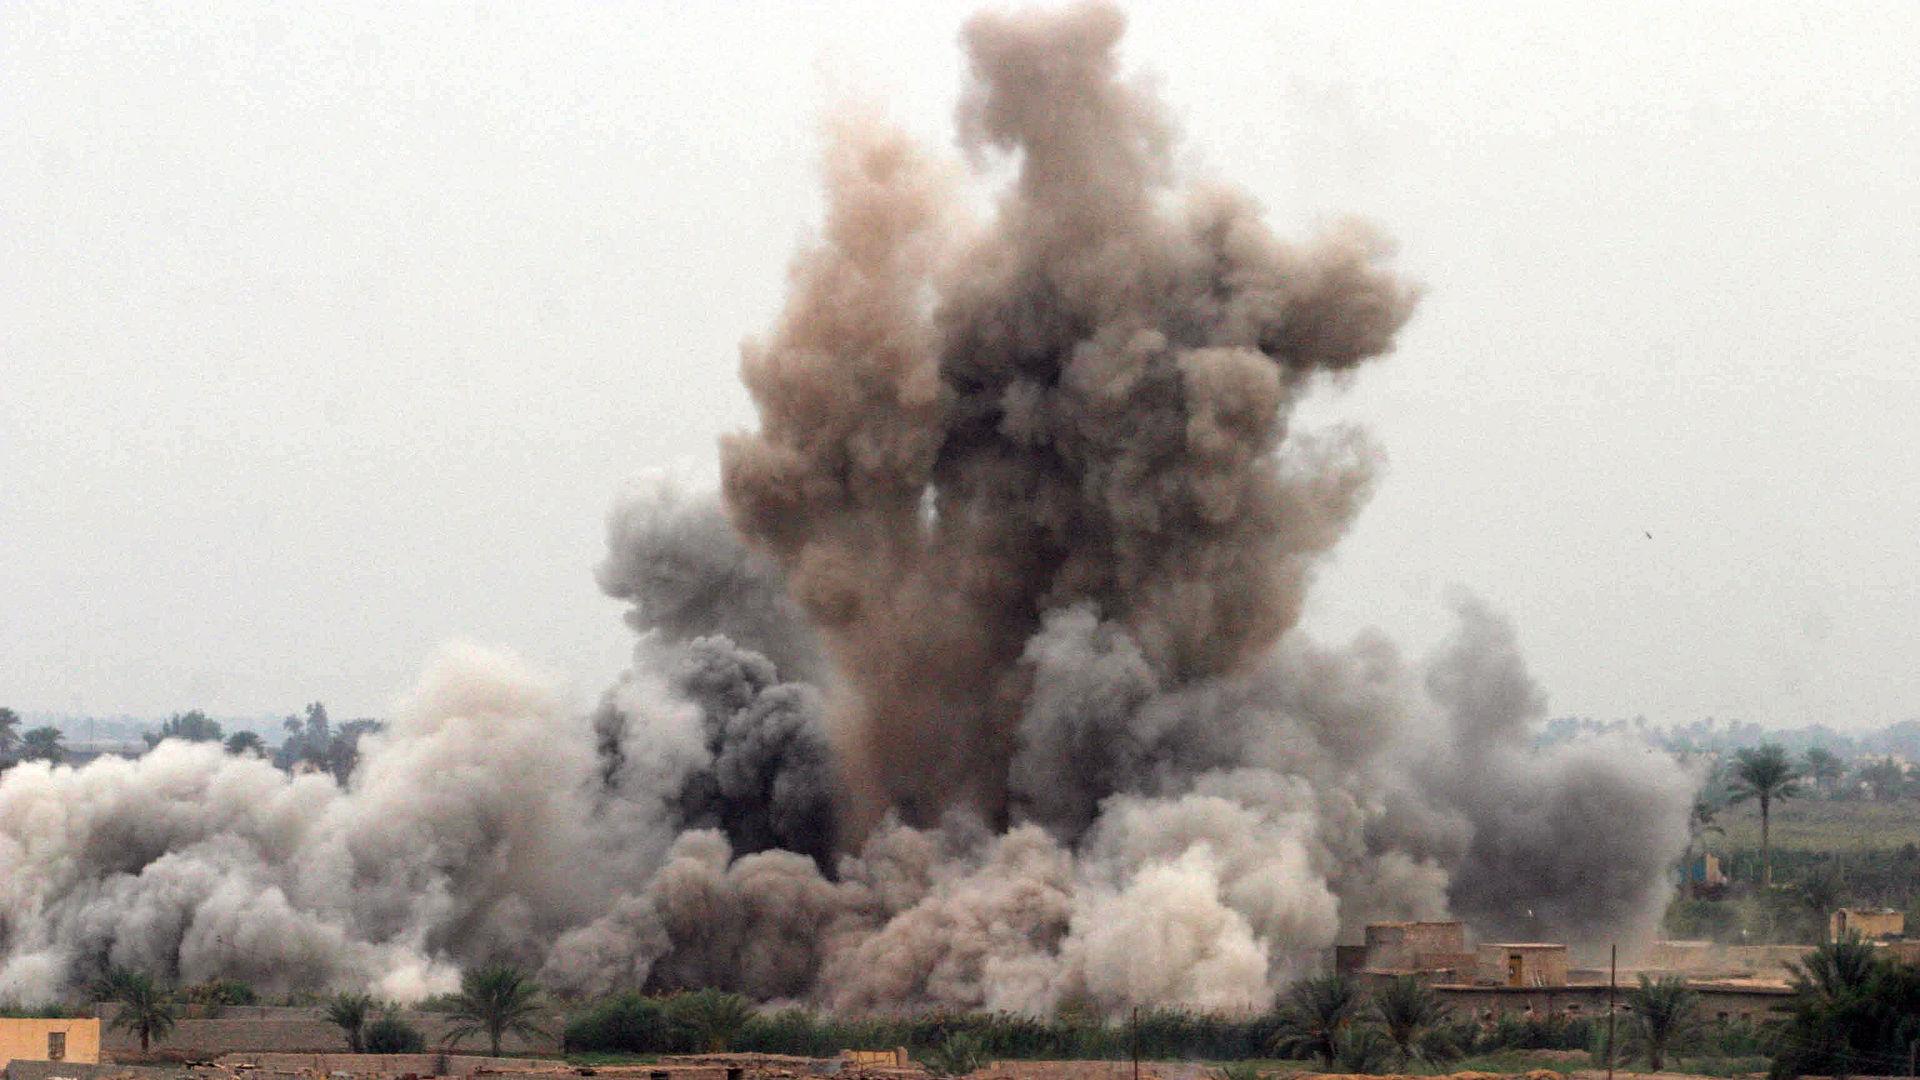 A US air strike on a suspected insurgent hideout in Fallujah in 2004. It's been more than 2 1/2 years since the US carried out air strikes in Iraq. 